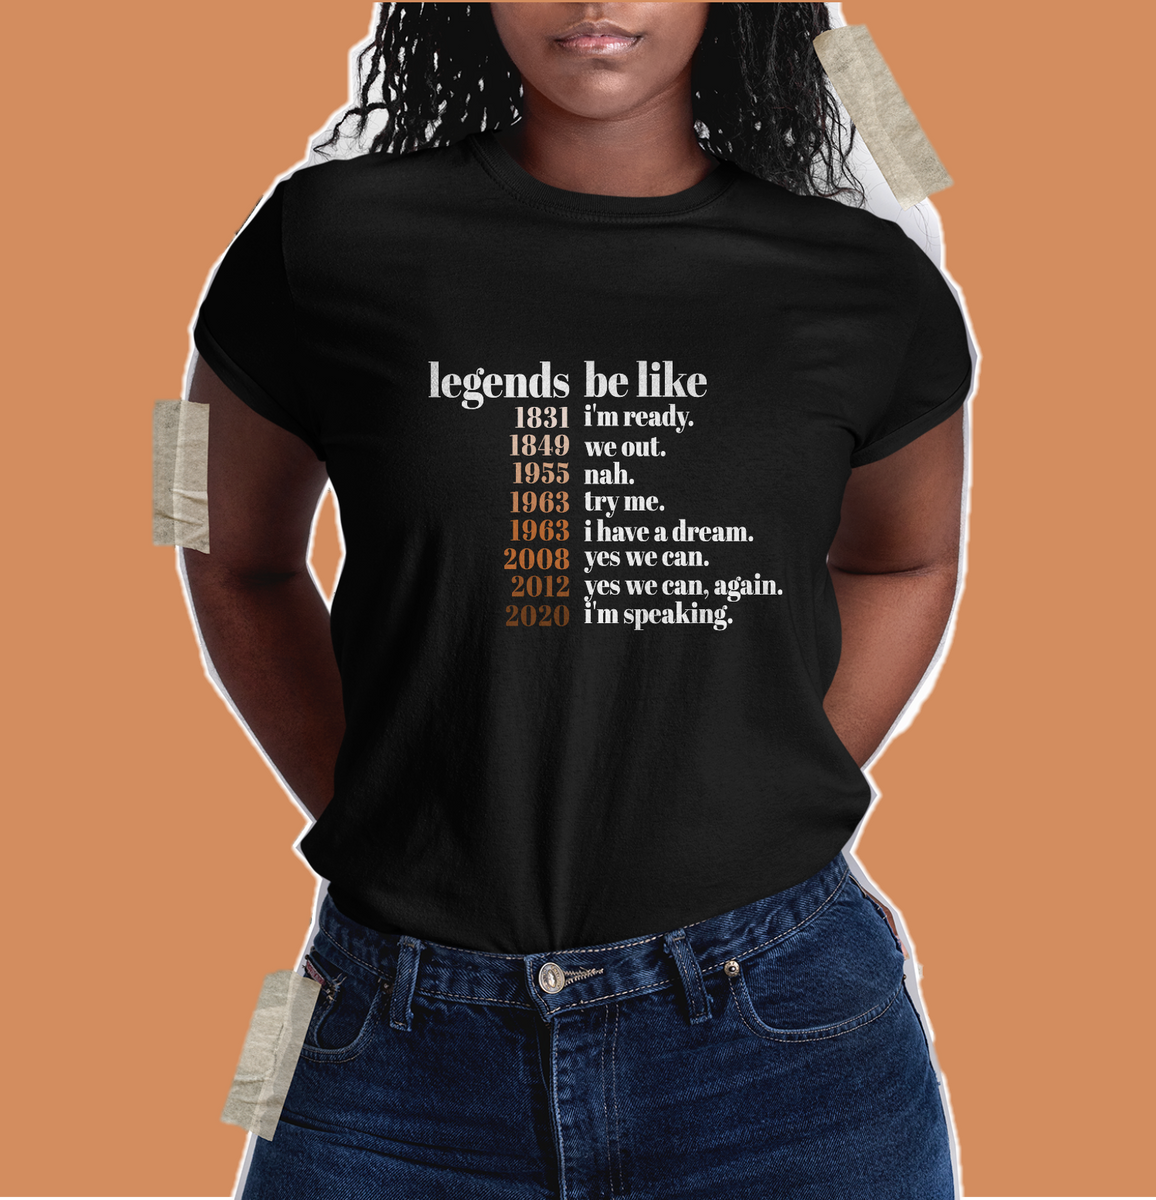 Top 7 Black History Month Shirts to Wear in 2023 – My Black Clothing